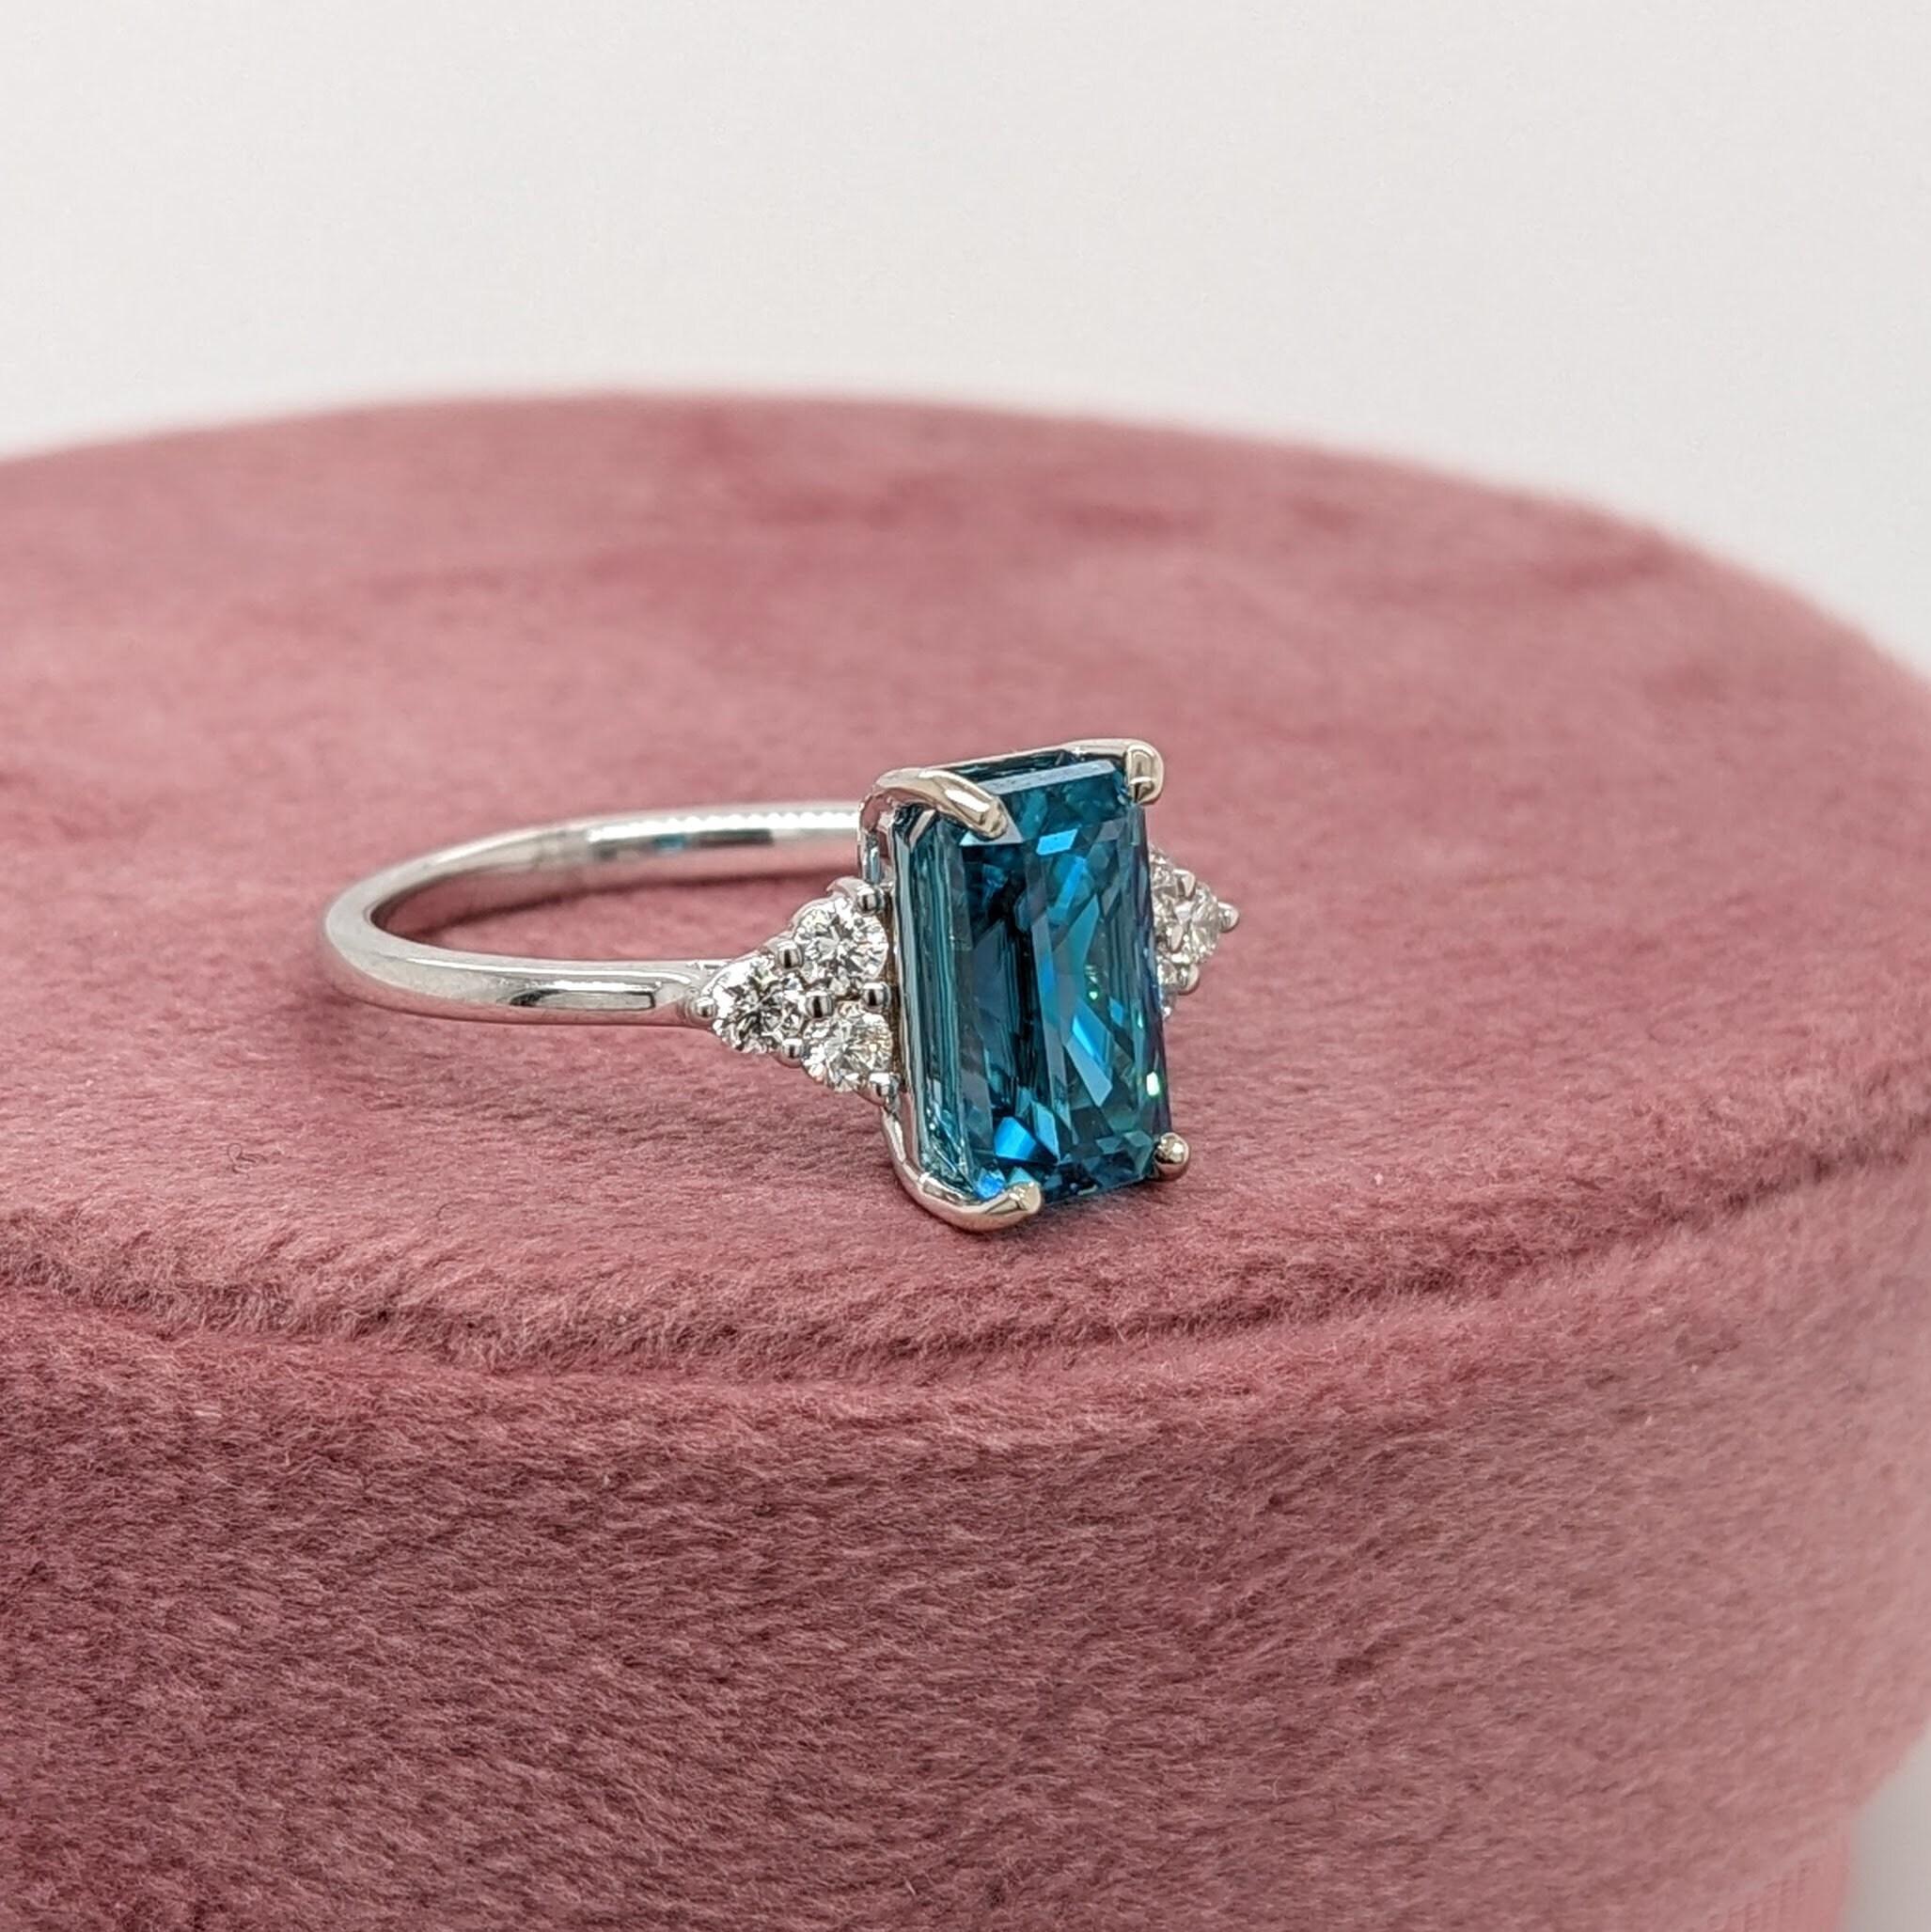 Emerald Cut 4.2ct Blue Zircon Ring w Earth Mined Diamonds in Solid 14K White Gold EM 9.5x6mm For Sale